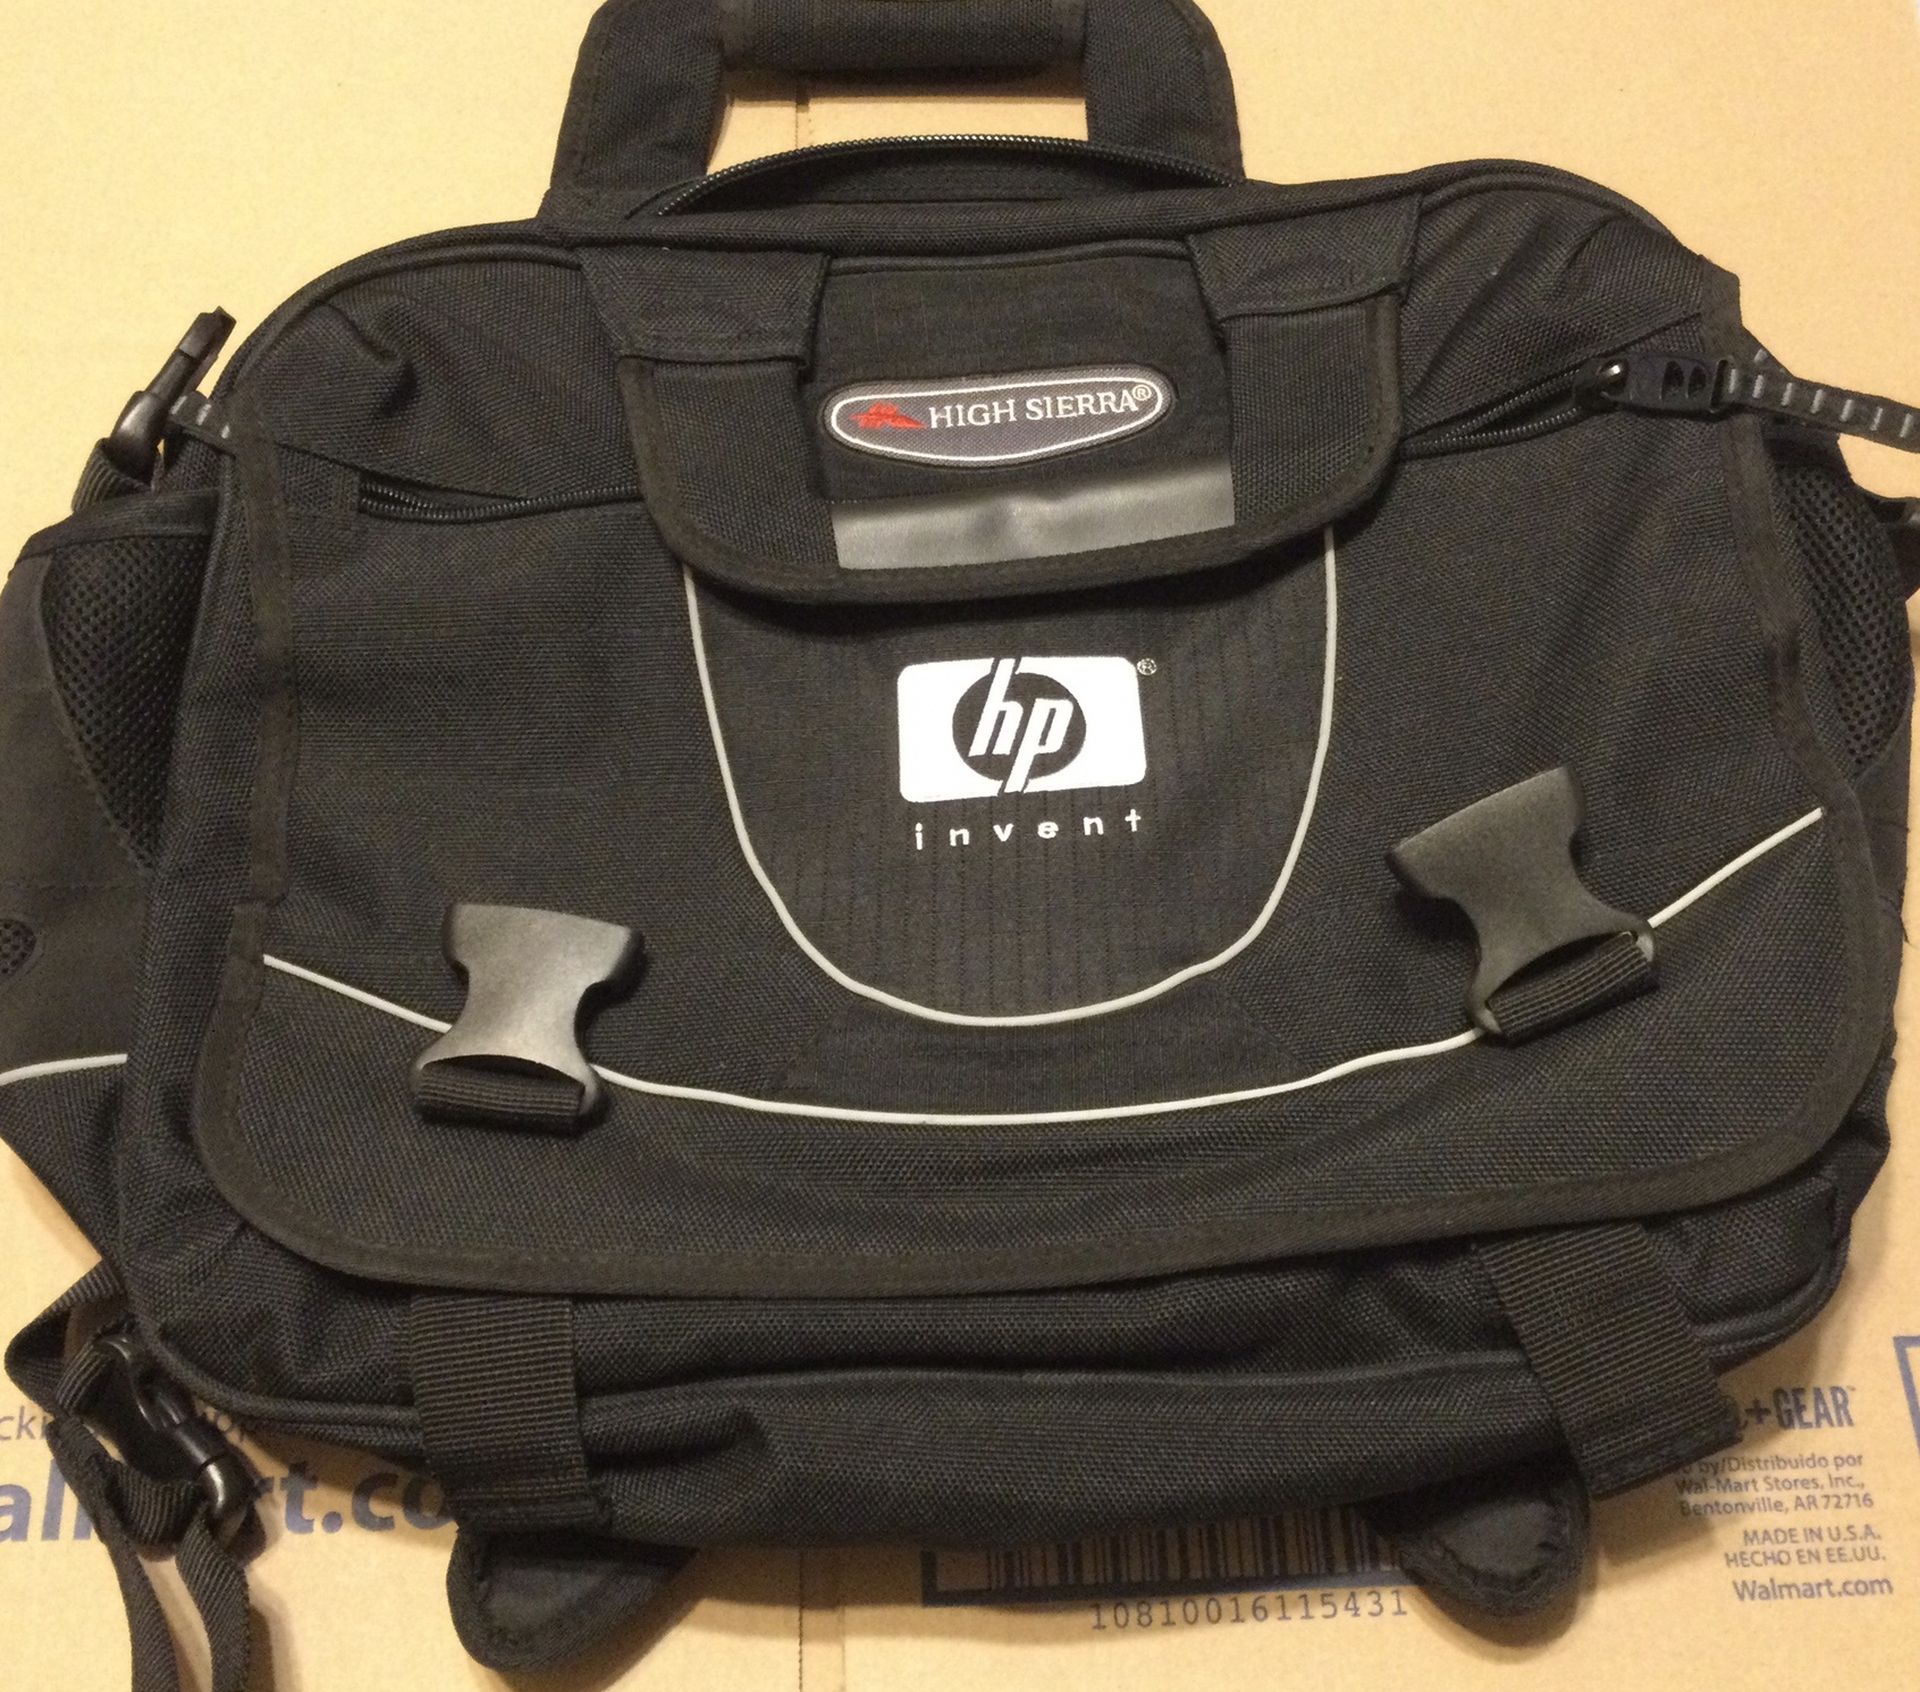 New! HP Invent-High Sierra Laptop/Backpack $40